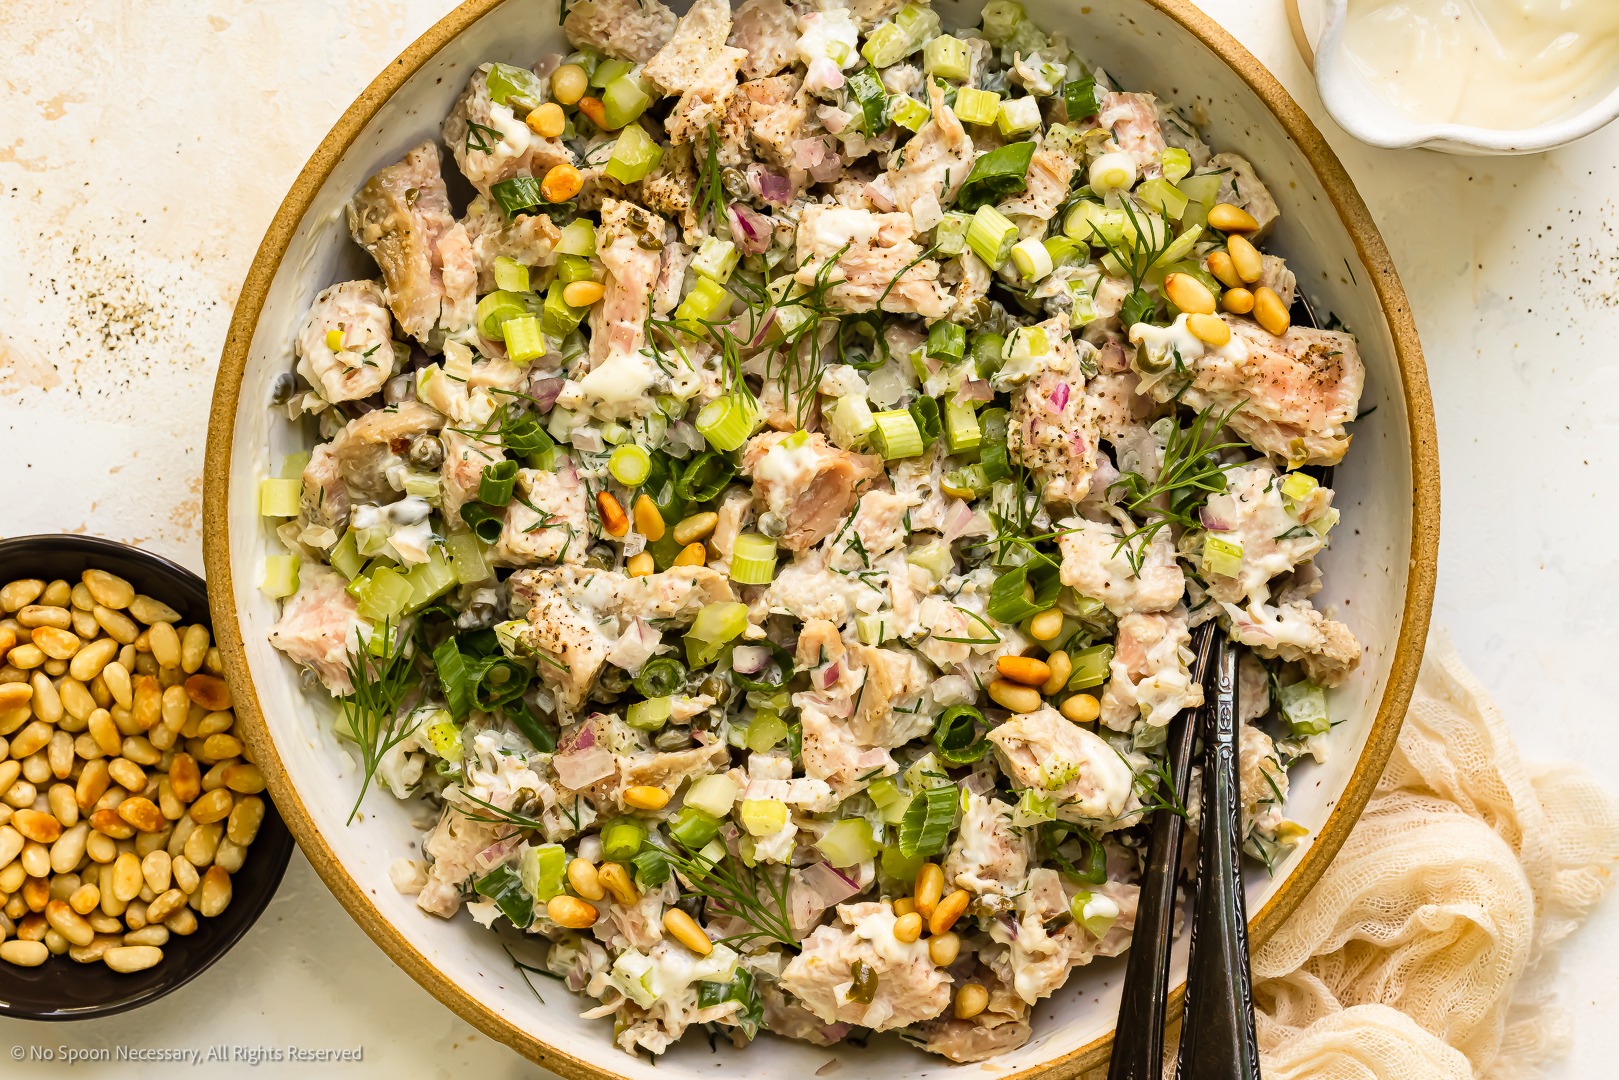 Highest Temperature Allowed for Cold Holding Tuna Salad